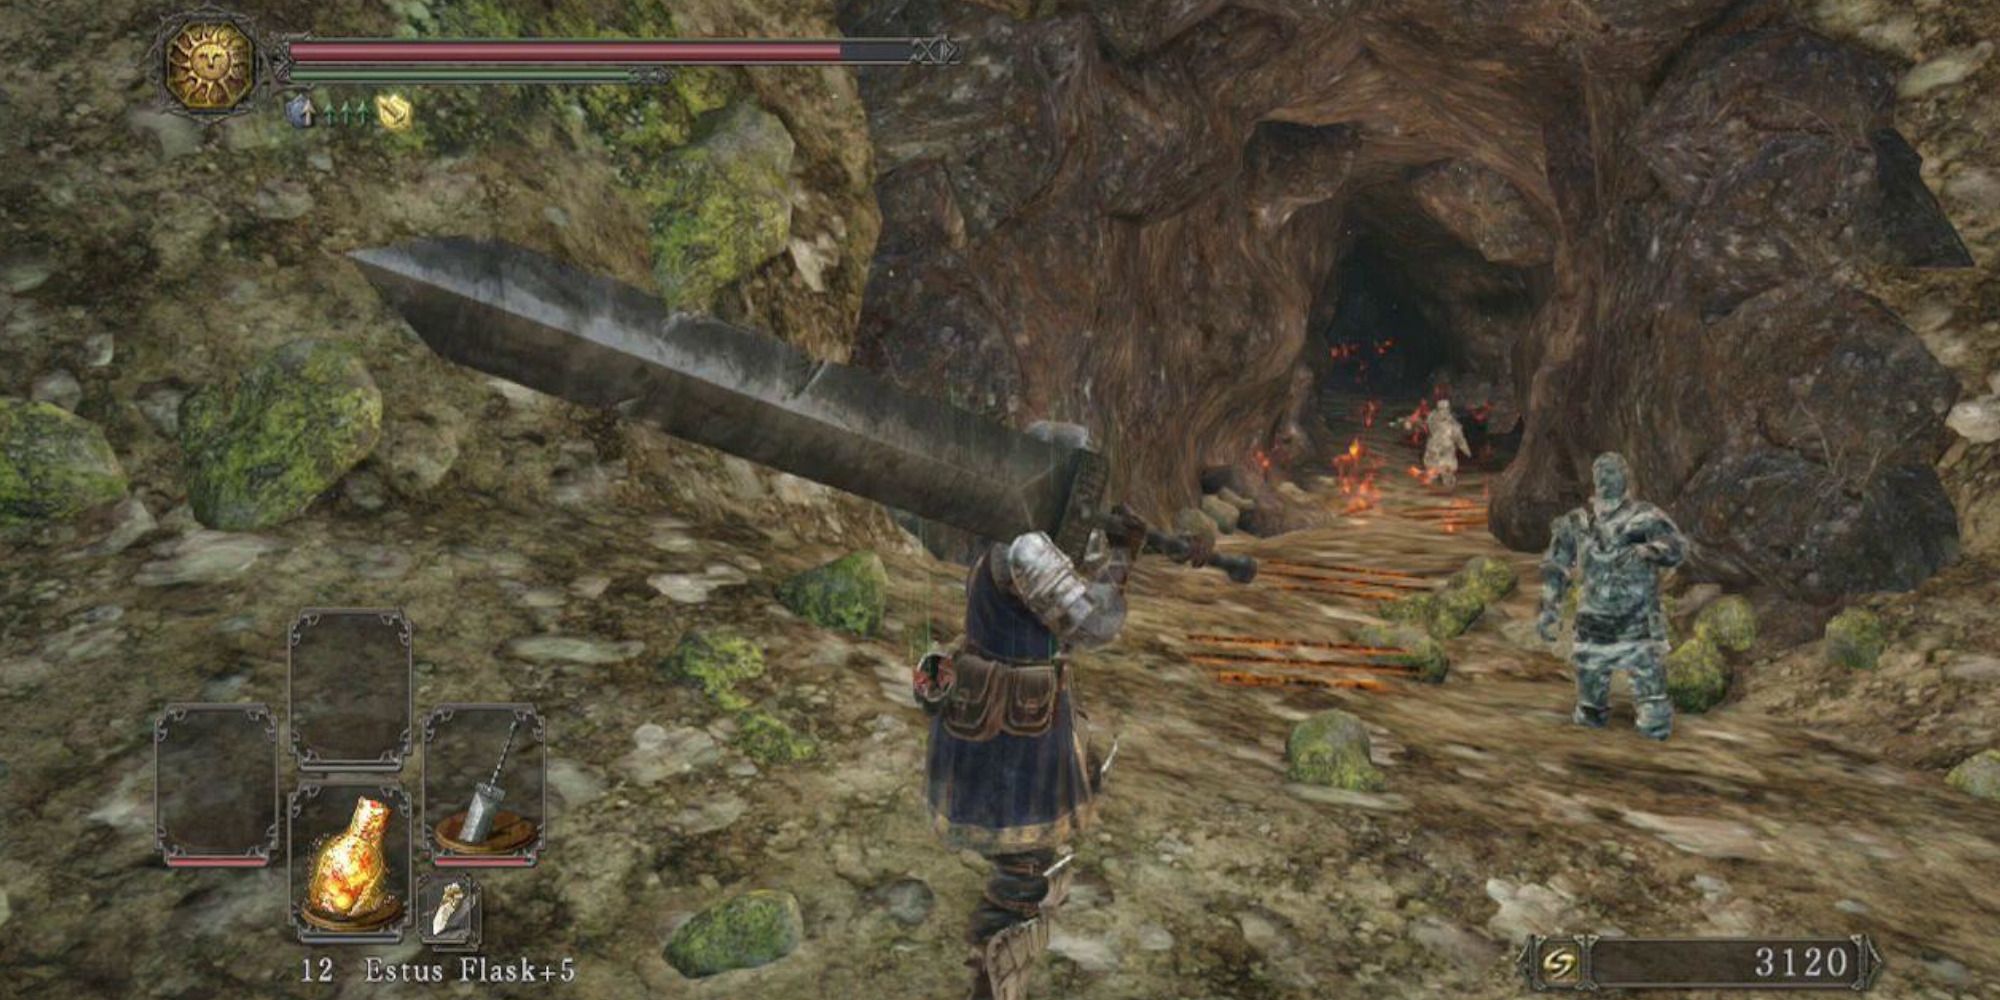 A Dark Souls 2 Player using the Greatsword ultra weapon with Light Armor